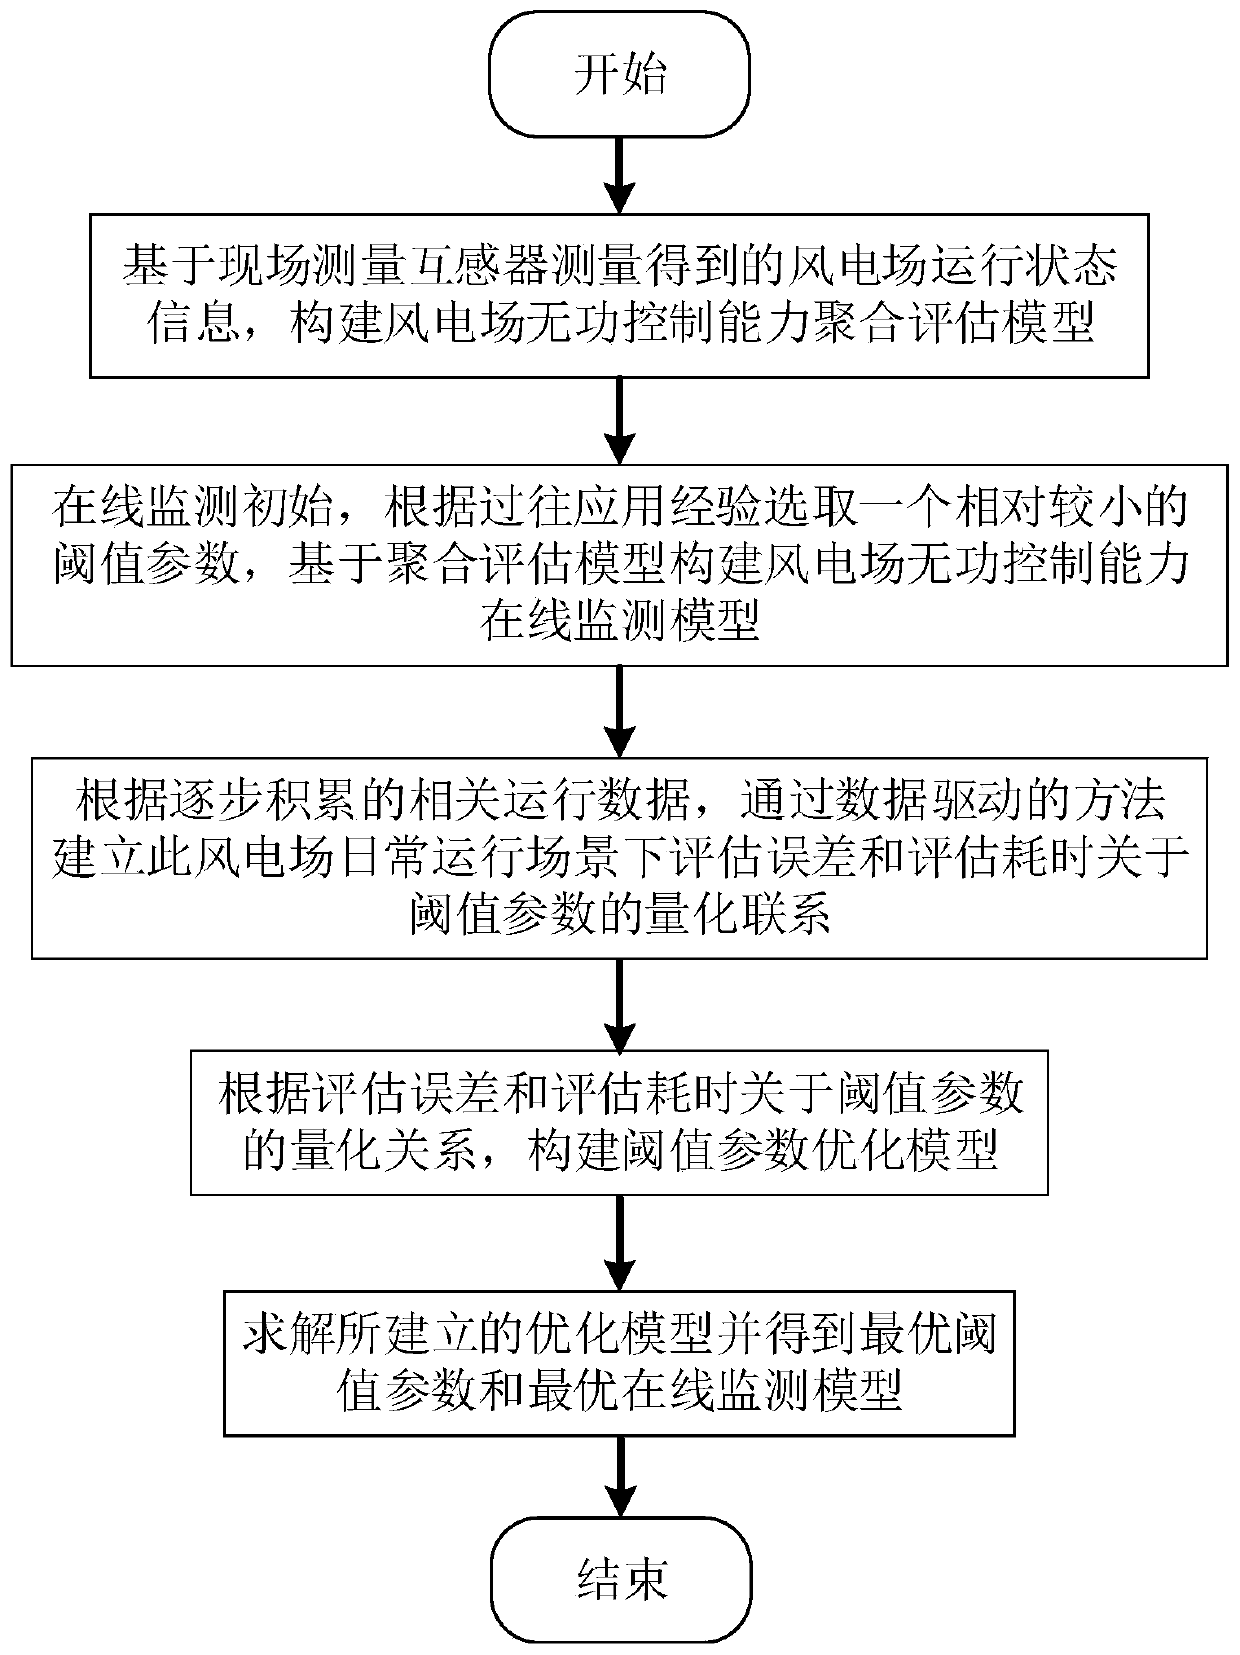 Online monitoring method of reactive power control capability of wind power plant